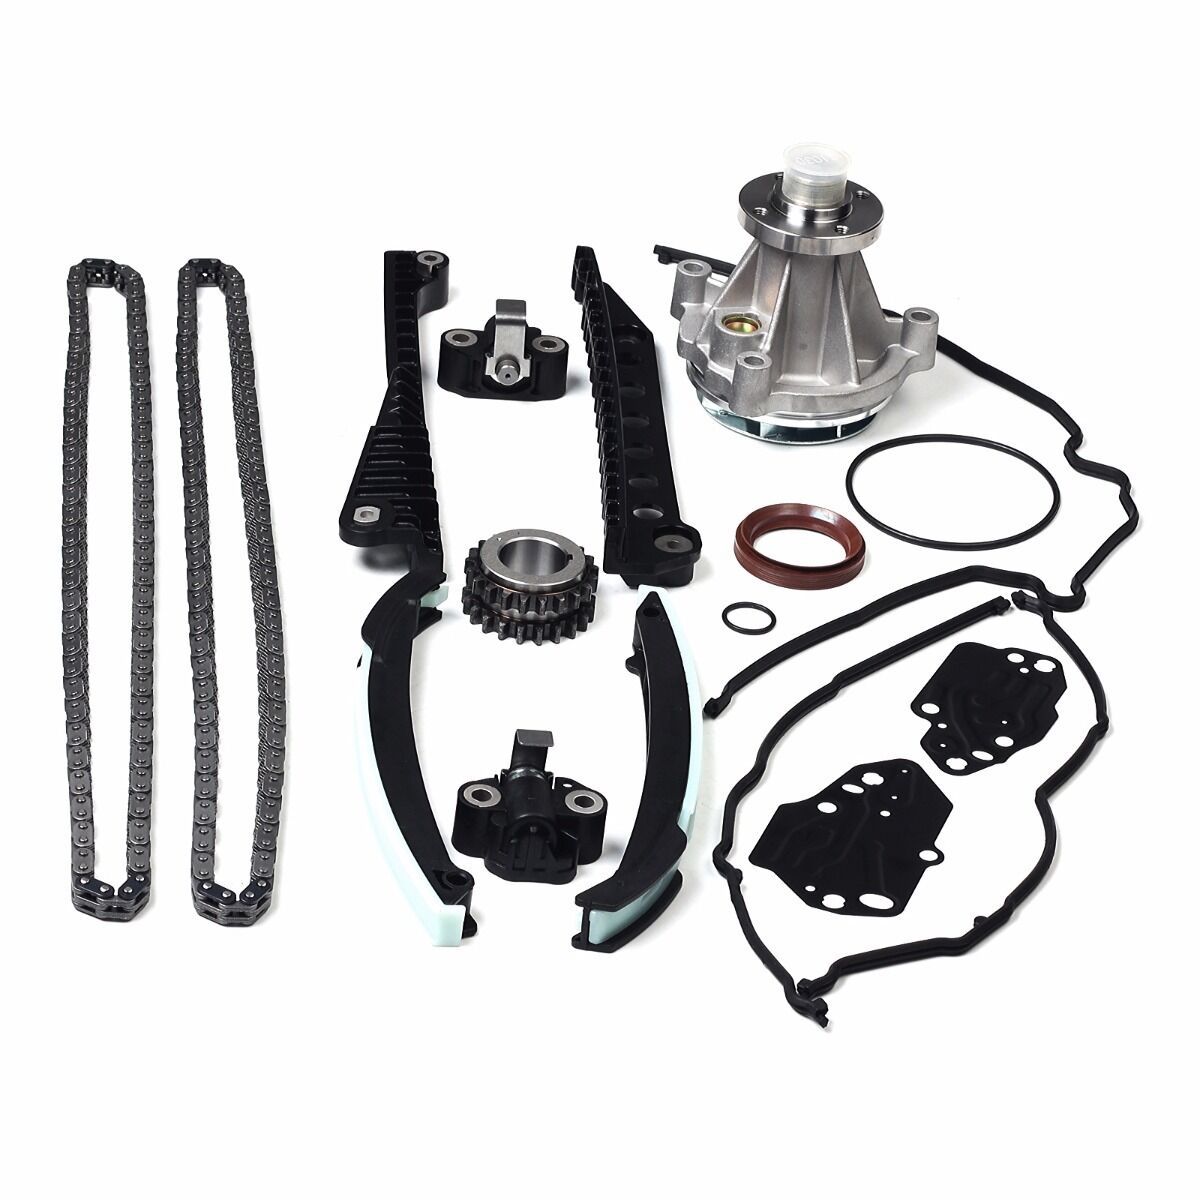 Timing Chain + Water Pump Kit+Cover Gasket Fits Ford Lincoln 5.4L 3V 04-08 New